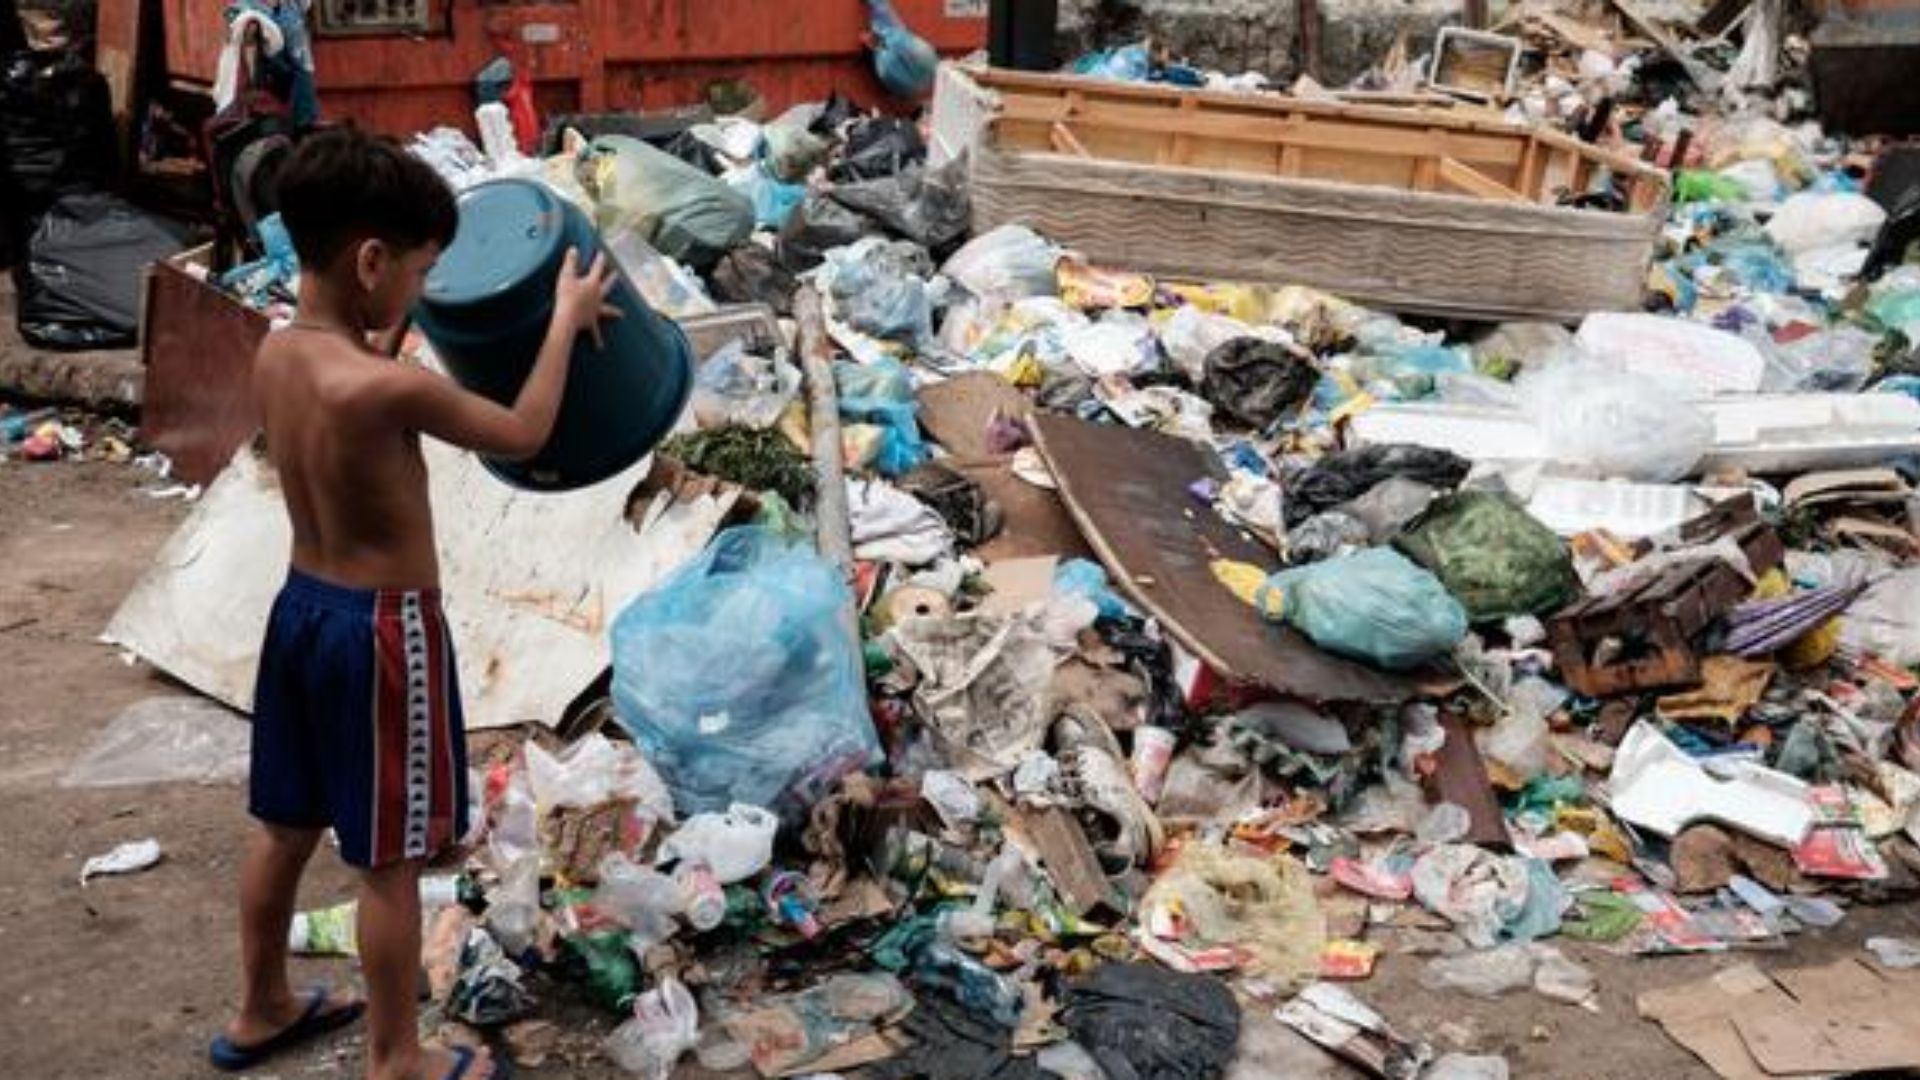 image of a waste dumping place